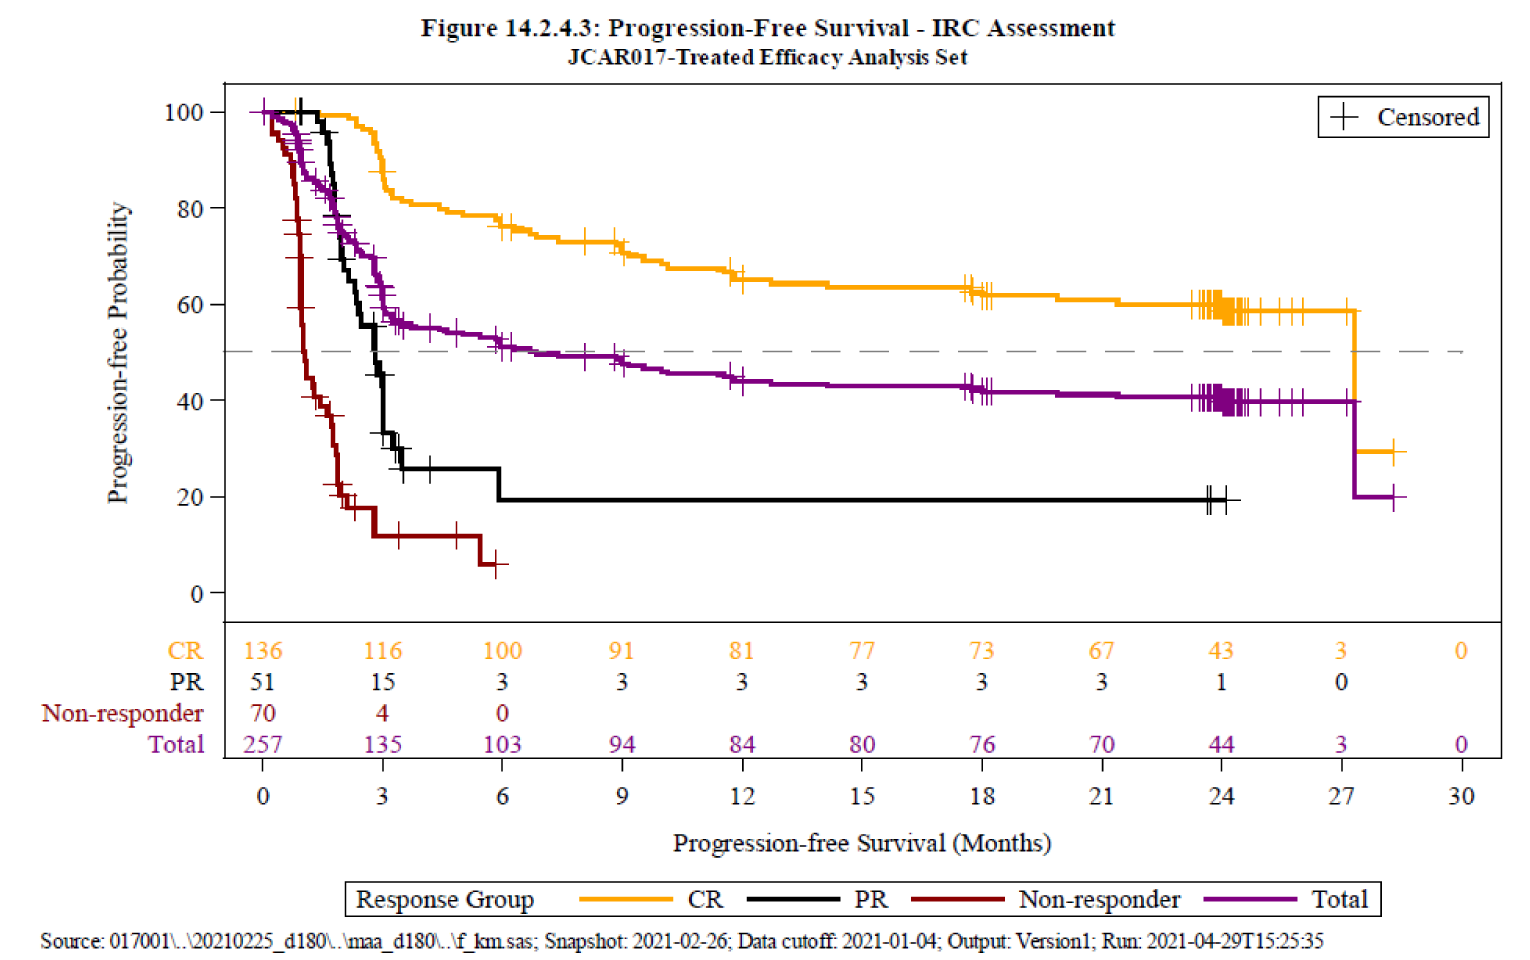 Alt text: This figure depicts the progression-free survival curves in the DLBCL efficacy set, starting at 100% survival and reaching 50% between 2, 4, 7, and 27 months for the non-responder, partial response, total, and complete response groups, respectively.